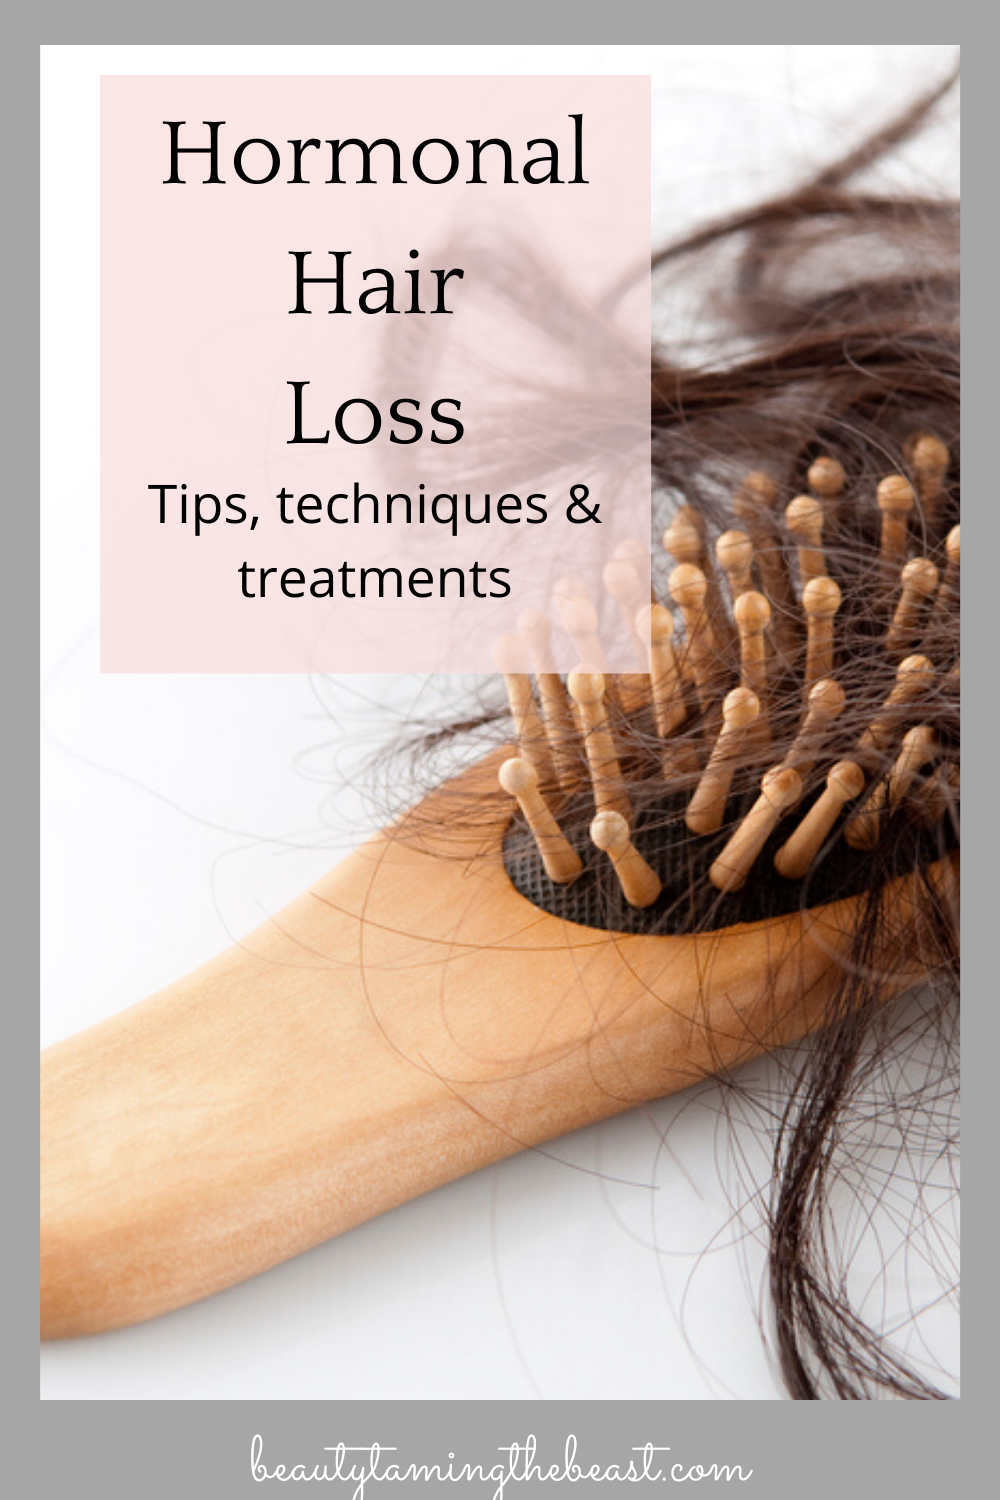 How To Treat Hormonal Hair Loss!